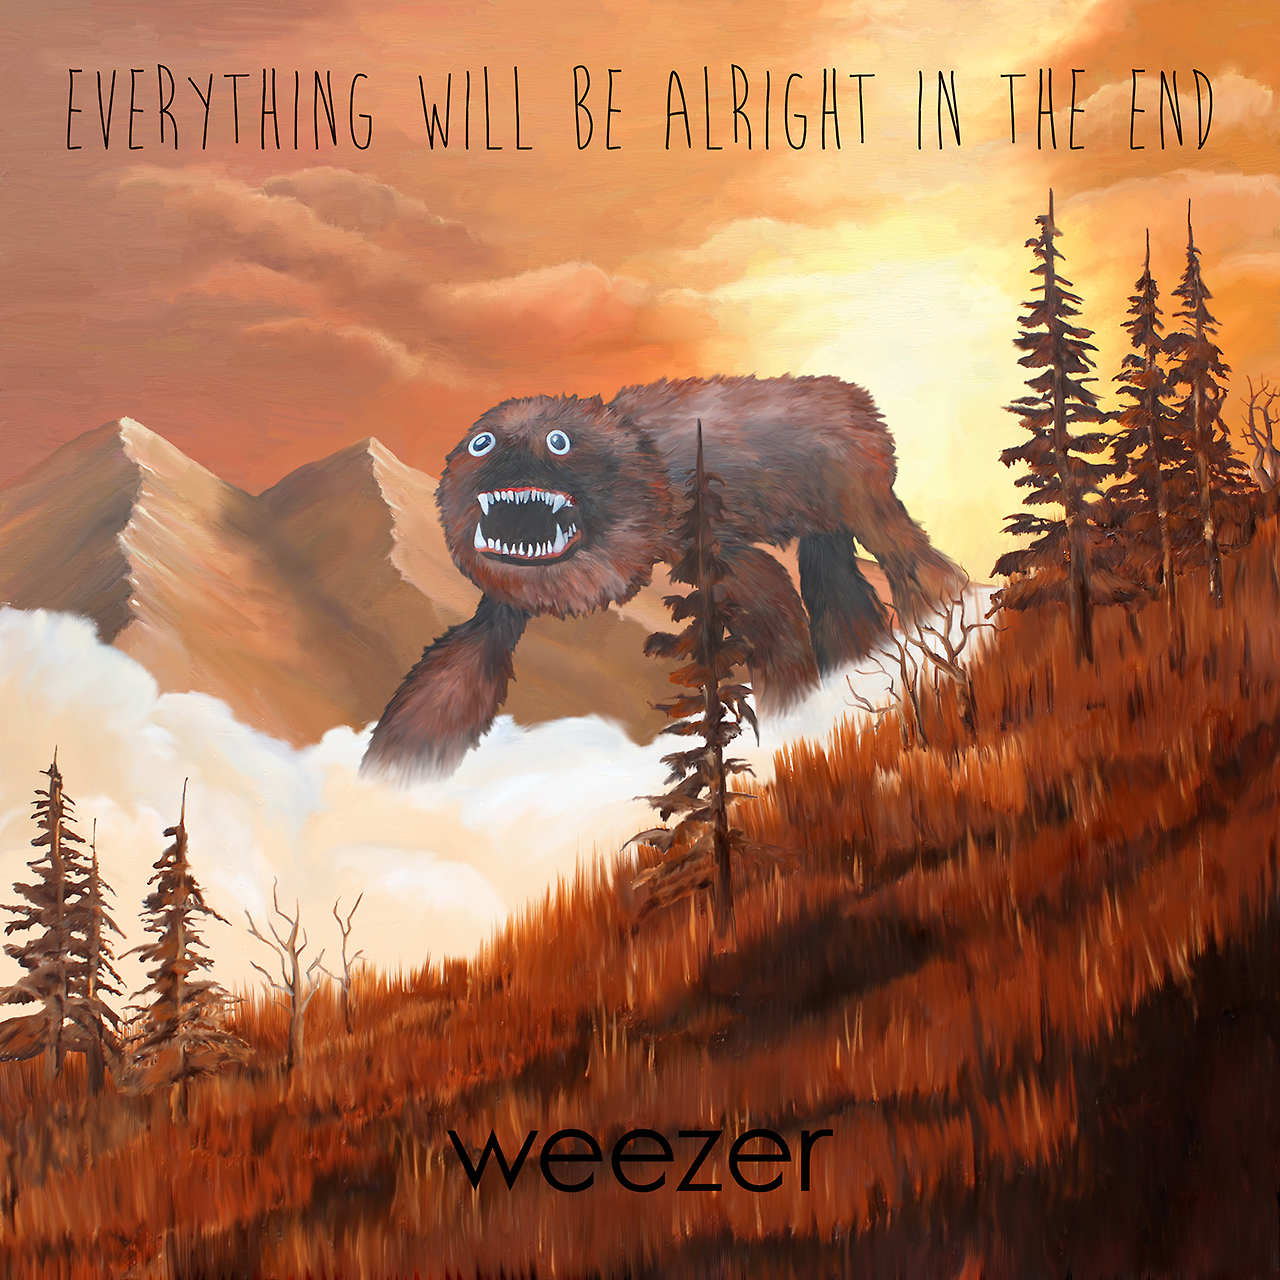 Albumcover von Weezers "Everything Will Be Alright In The End", Quelle: Weezer/Universal Music